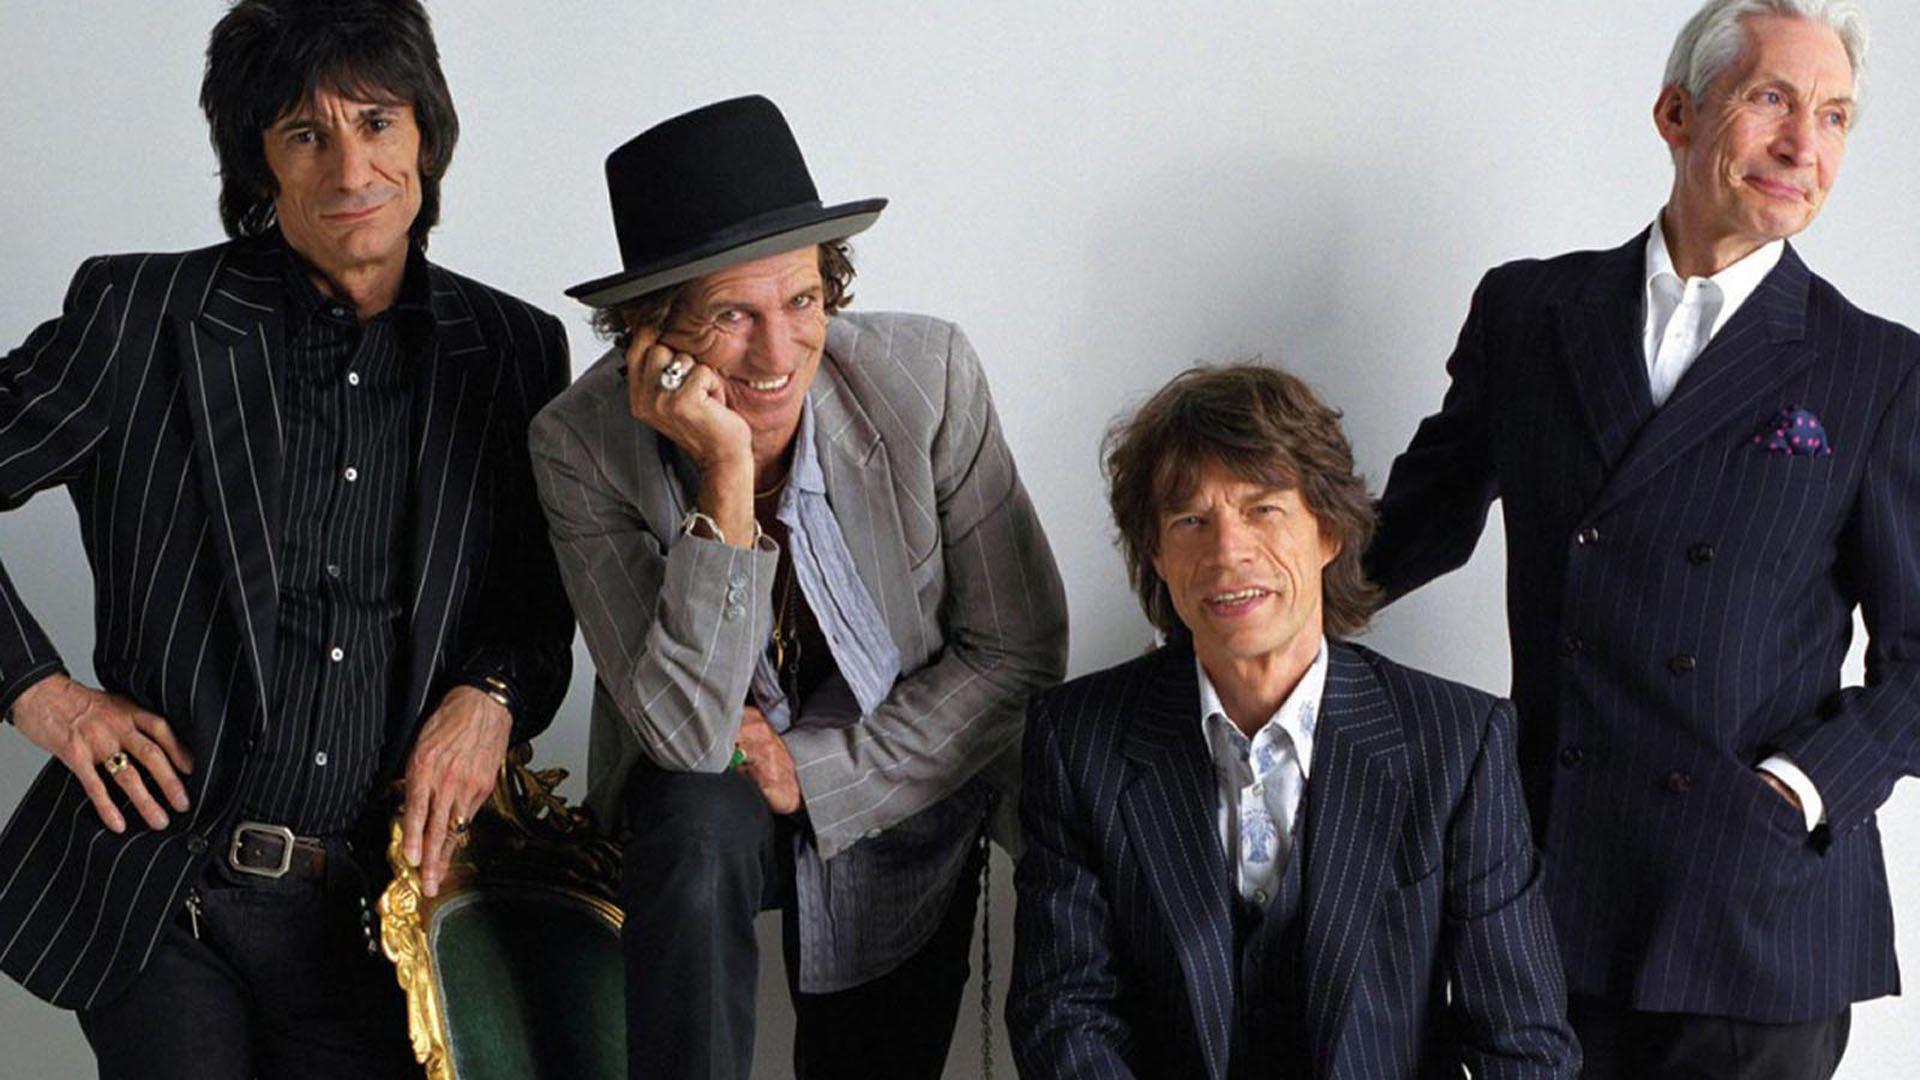 Wallpaper of the day: The Rolling Stones. The Rolling Stones